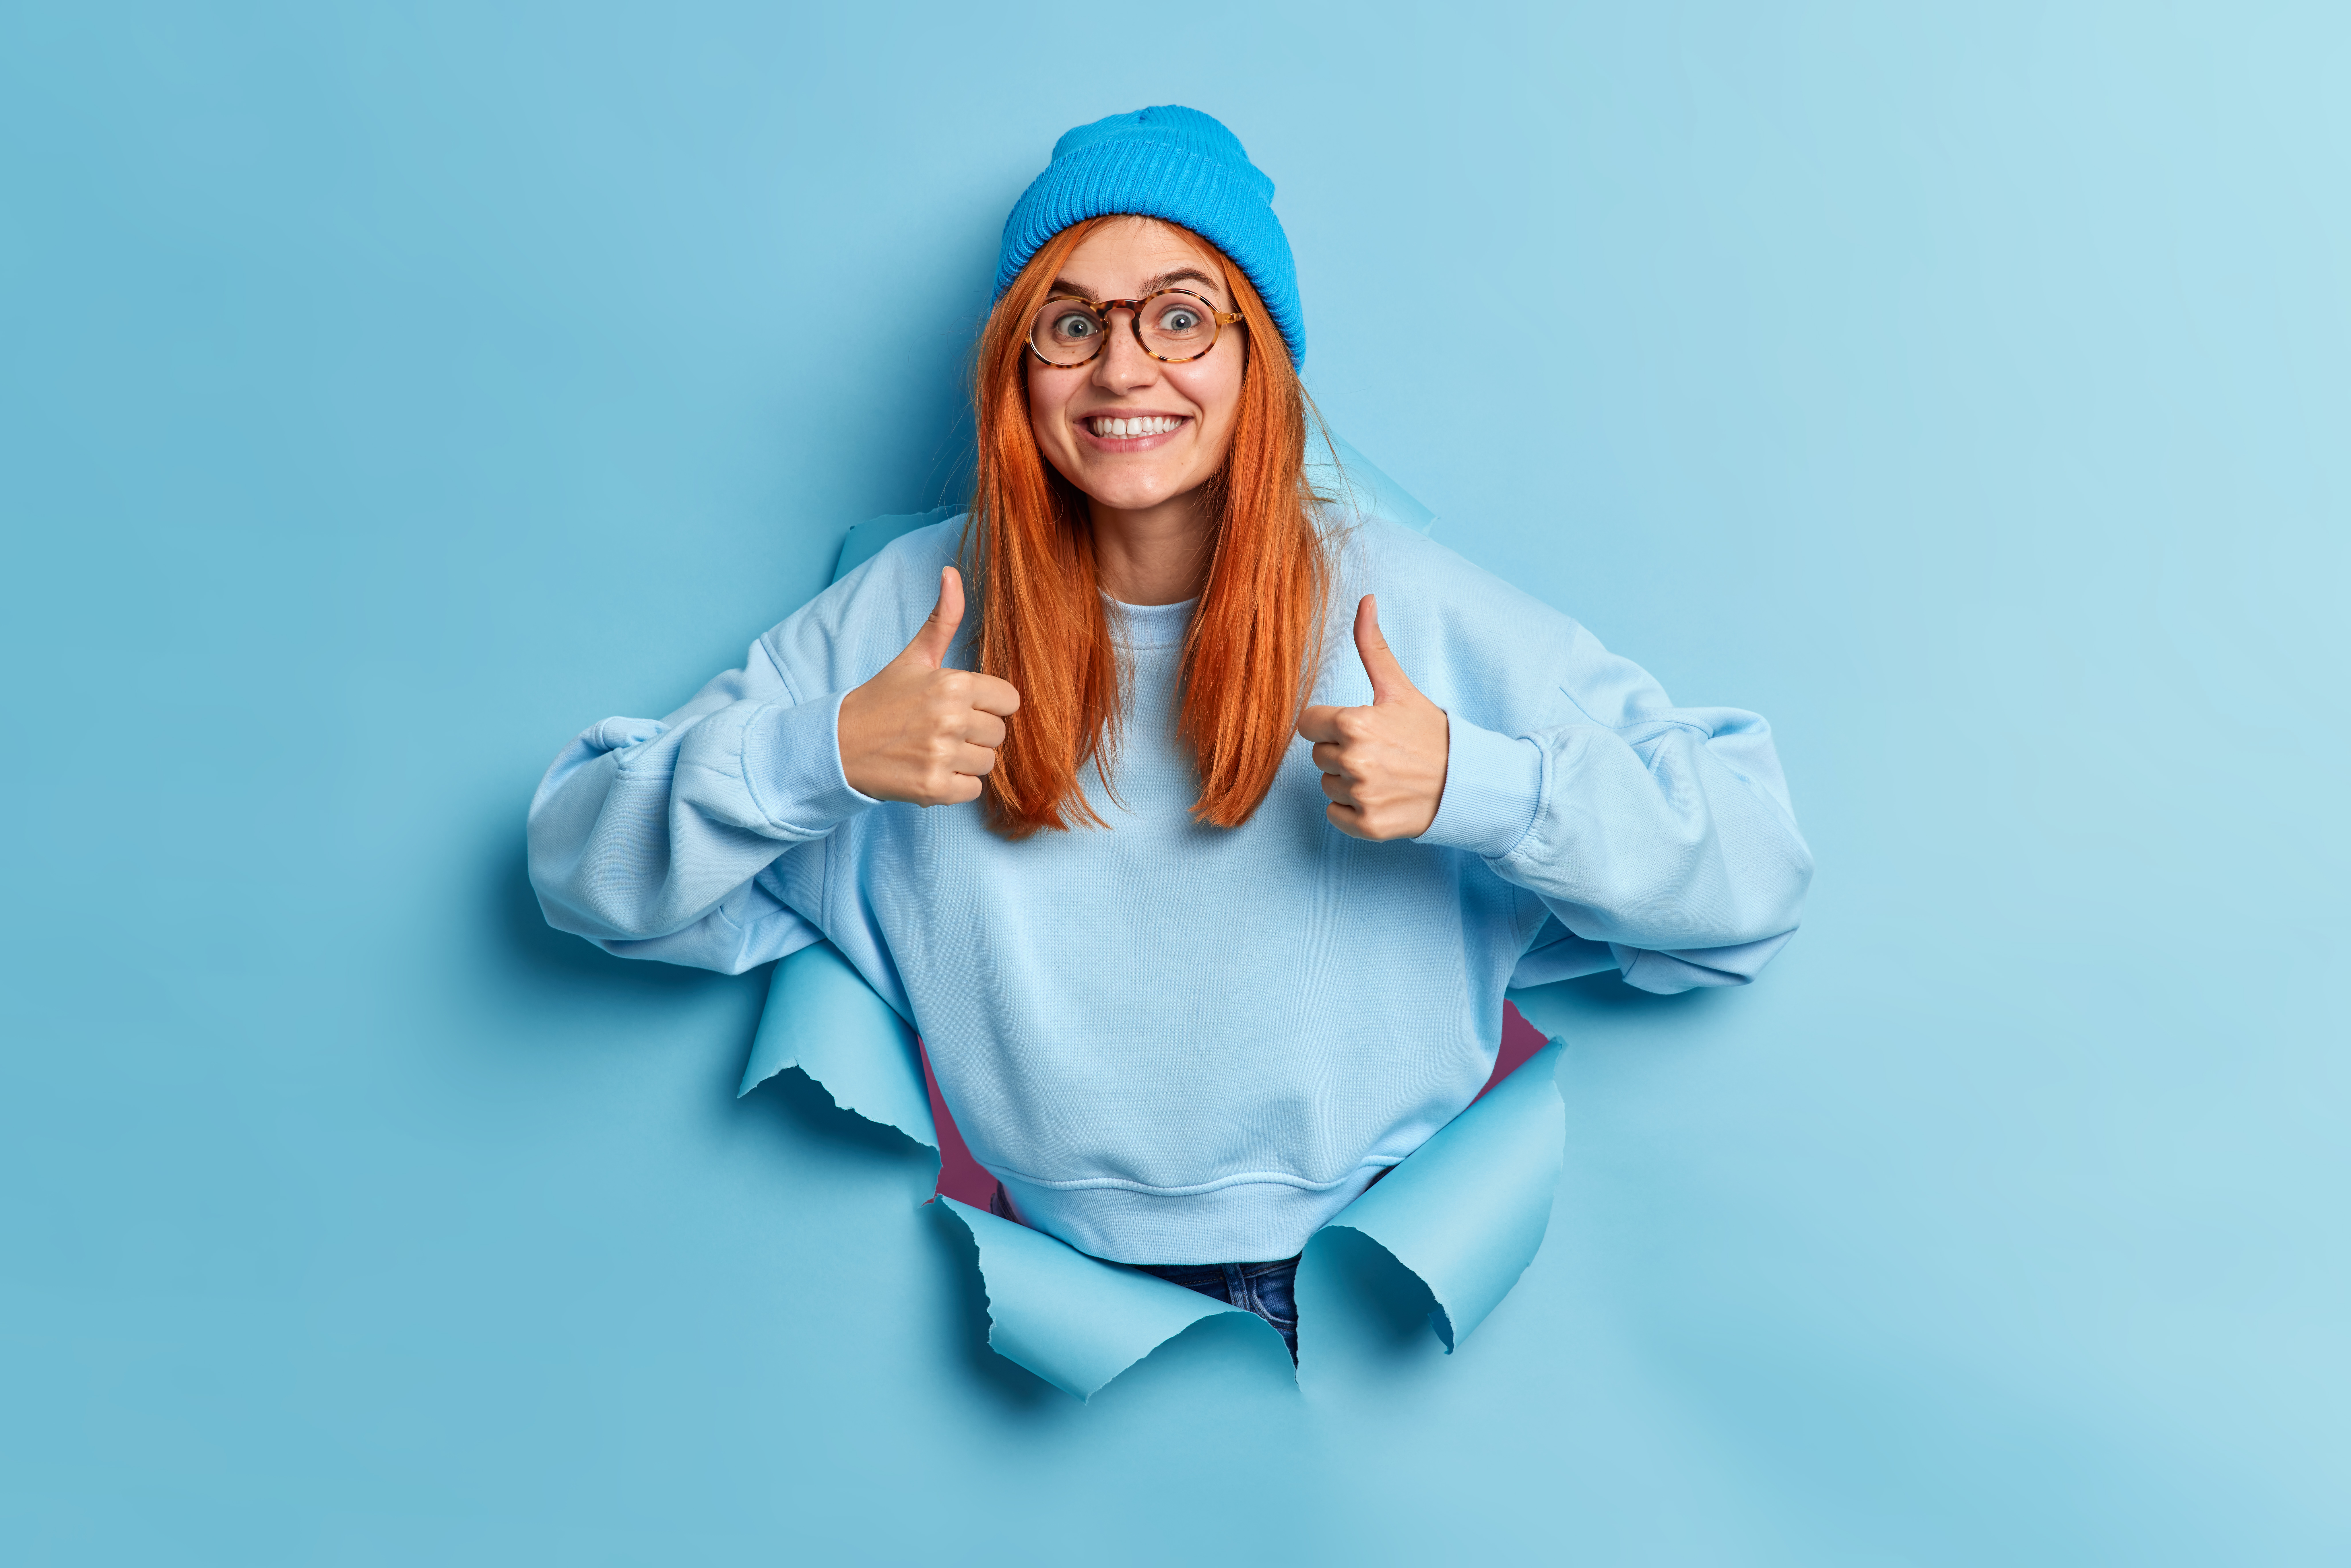 cheerful-redhead-european-woman-makes-thumb-up-gesture-makes-excellent-sign-approves-something-smiles-broadly-wears-hat-sweater-breaks-through-paper-hole